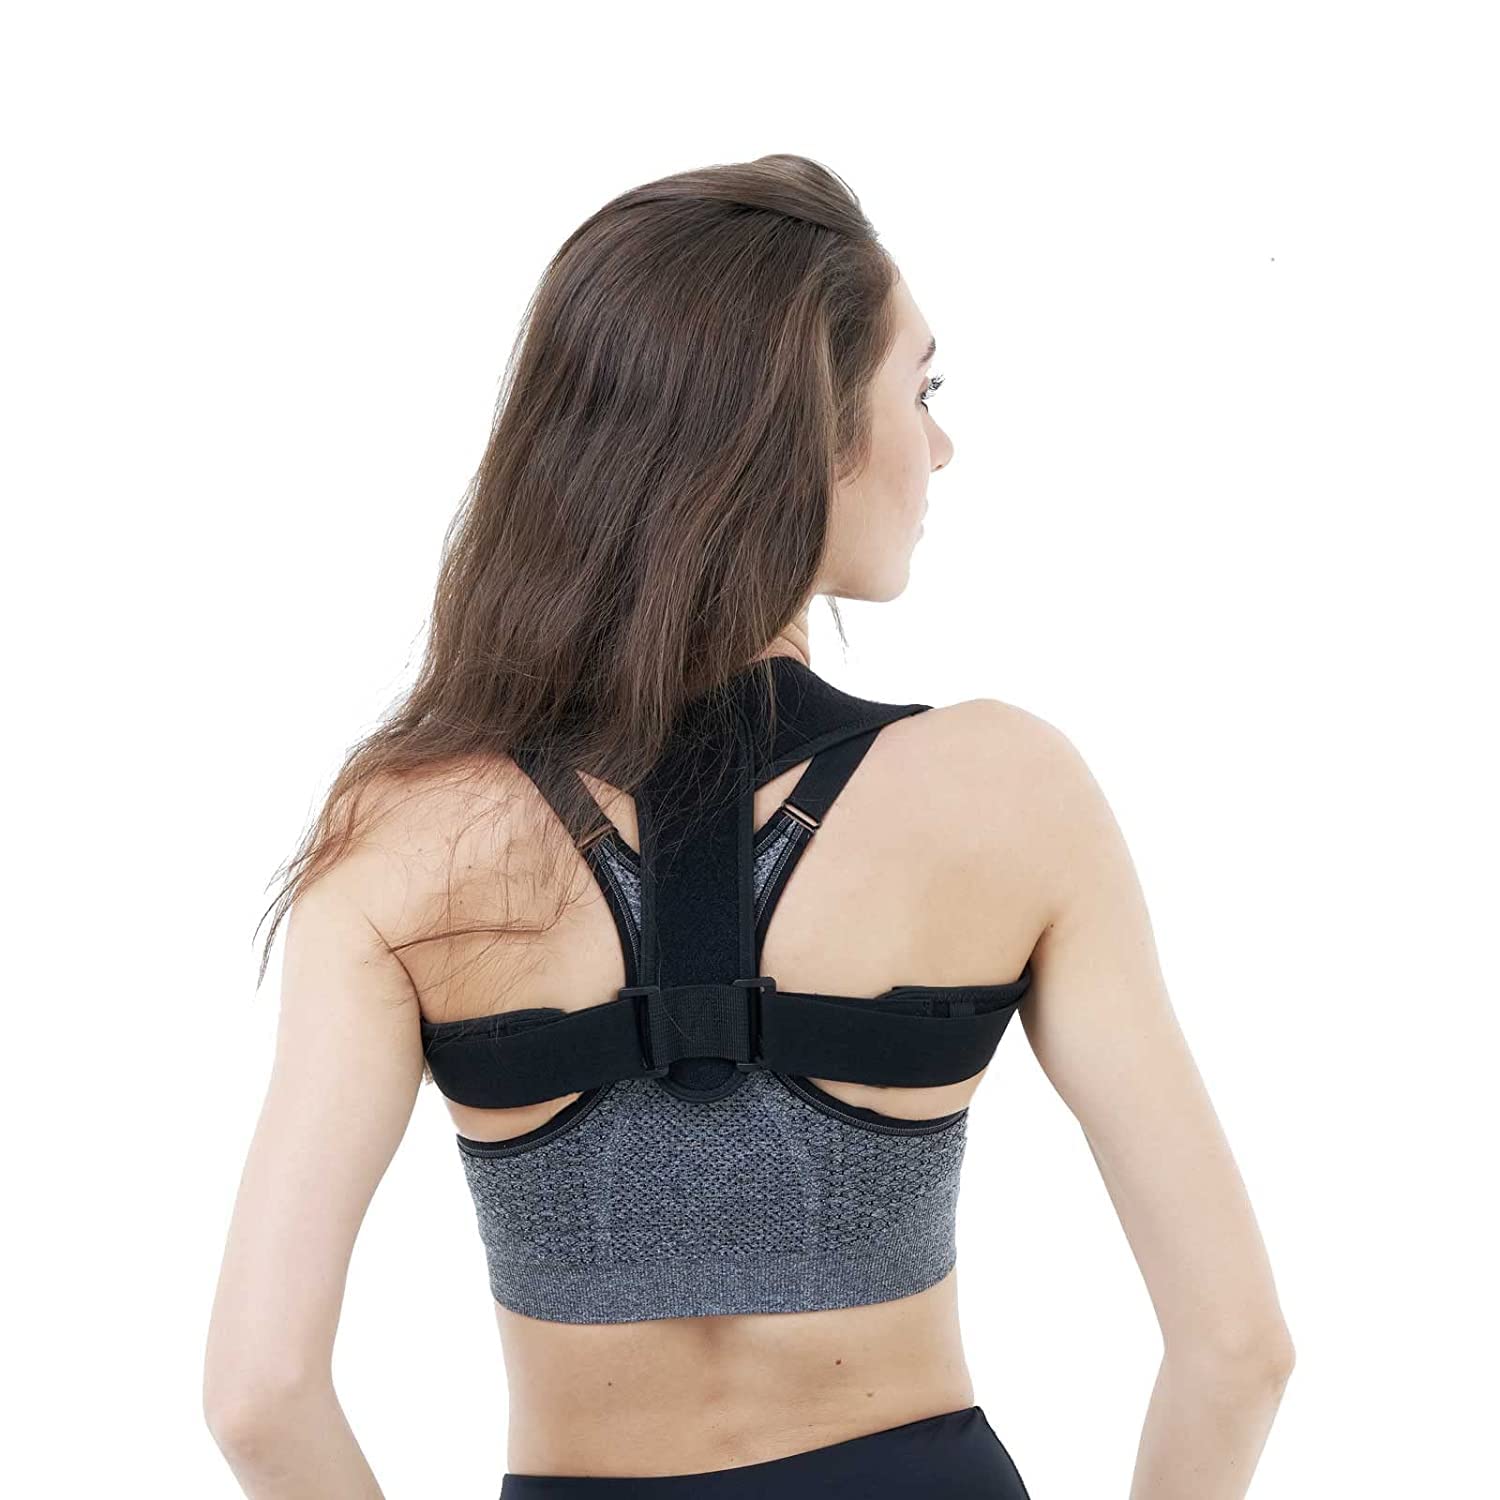 How Posture Bras Alleviate Back Pain